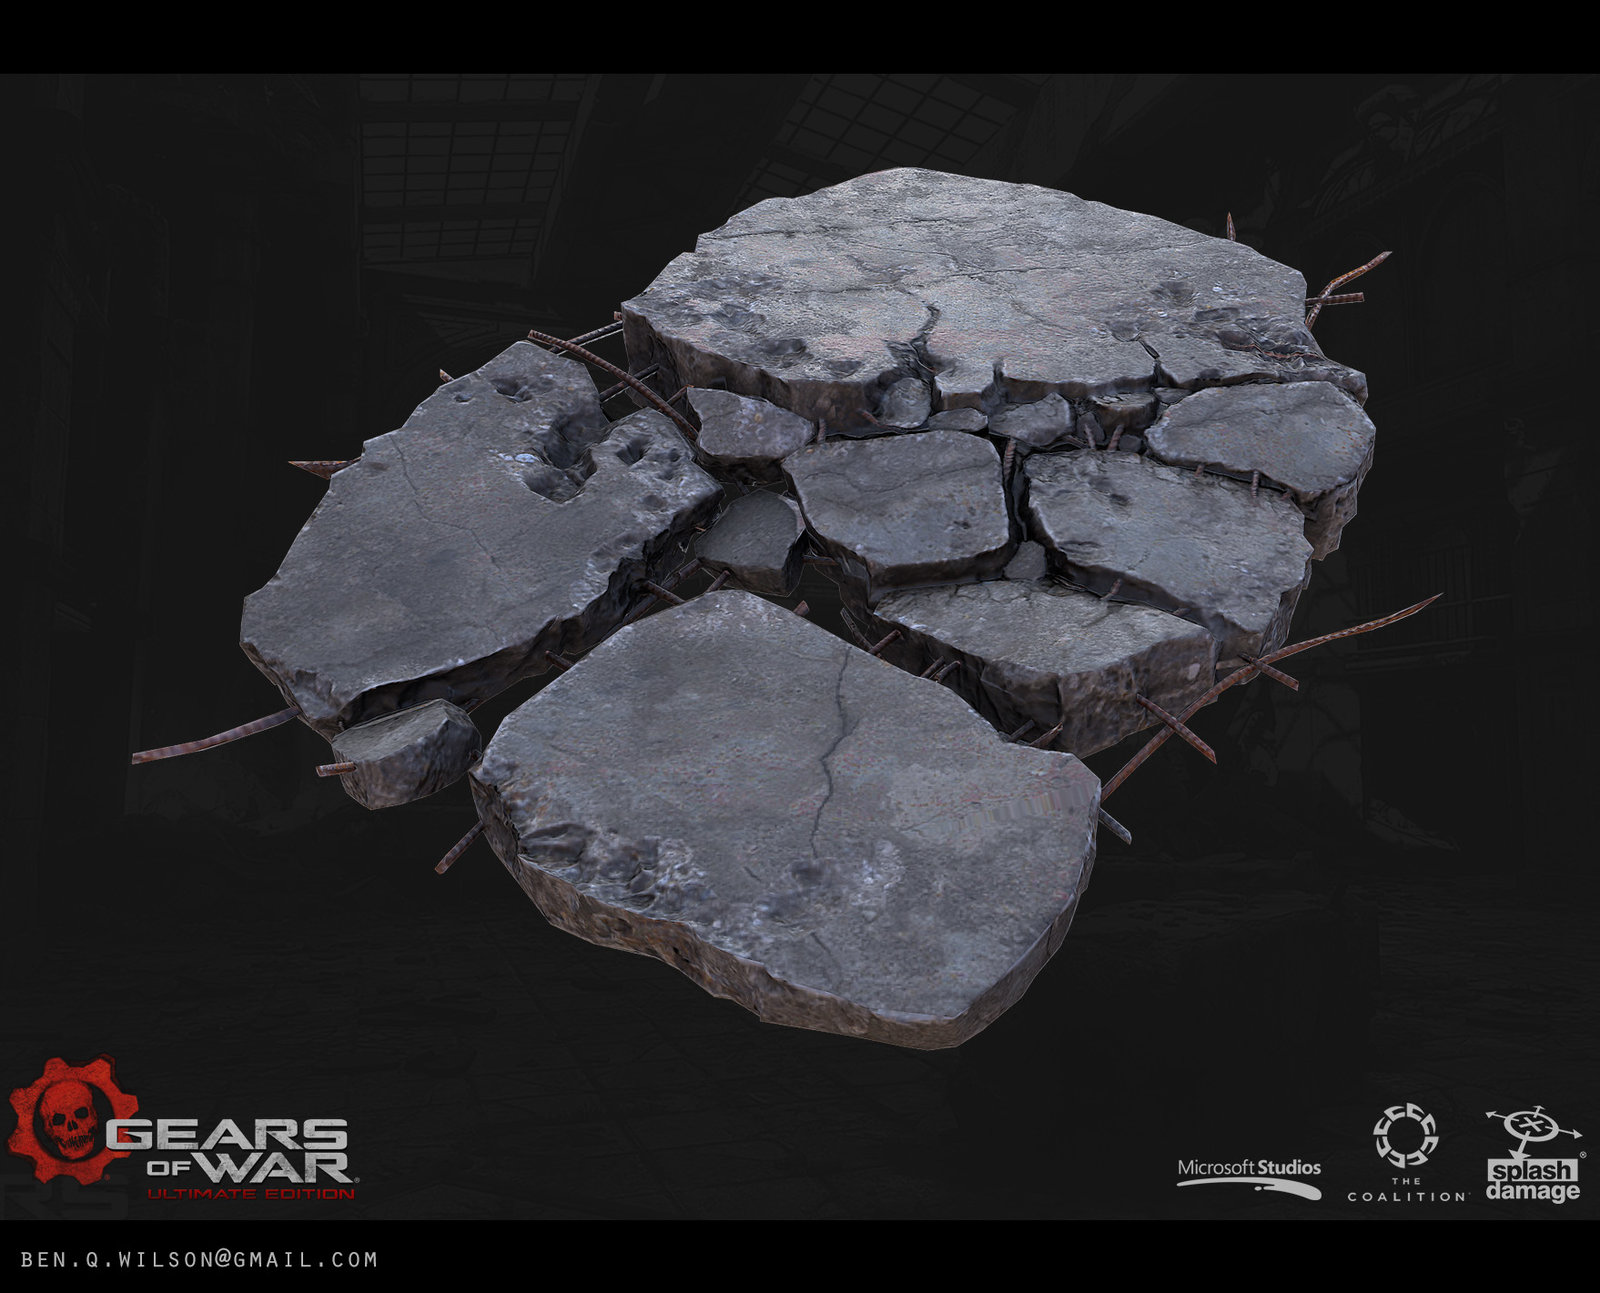 Some more examples of assets I created for the rubble collection.